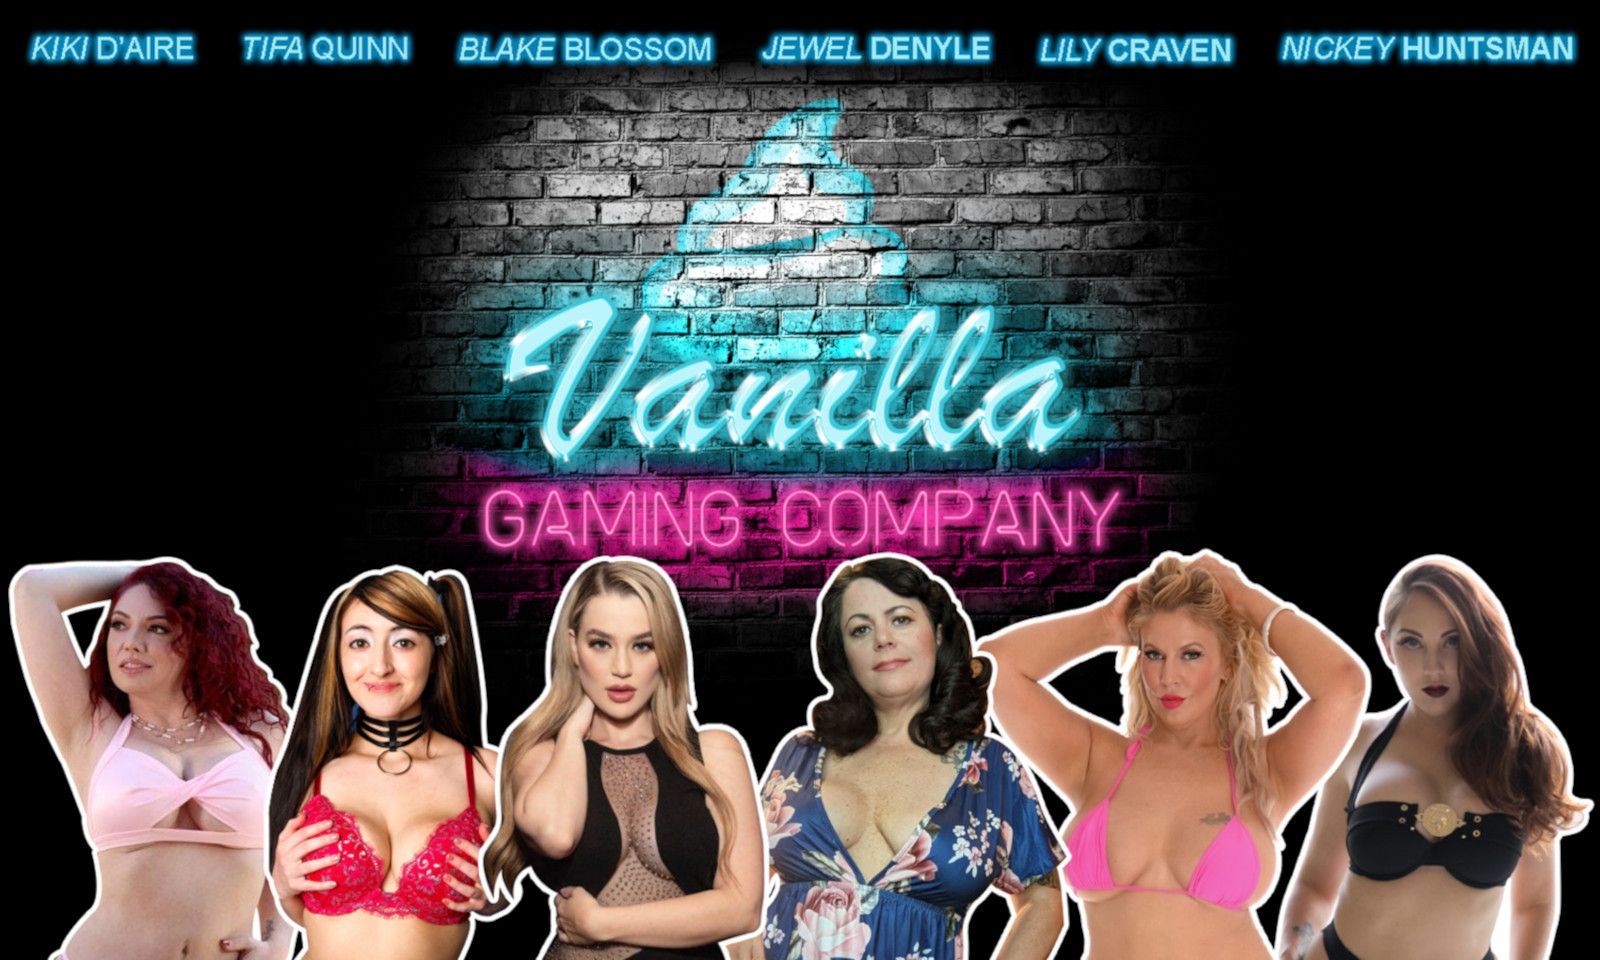 Vanilla Gaming Company Signs Host of Adult Talent for New Games